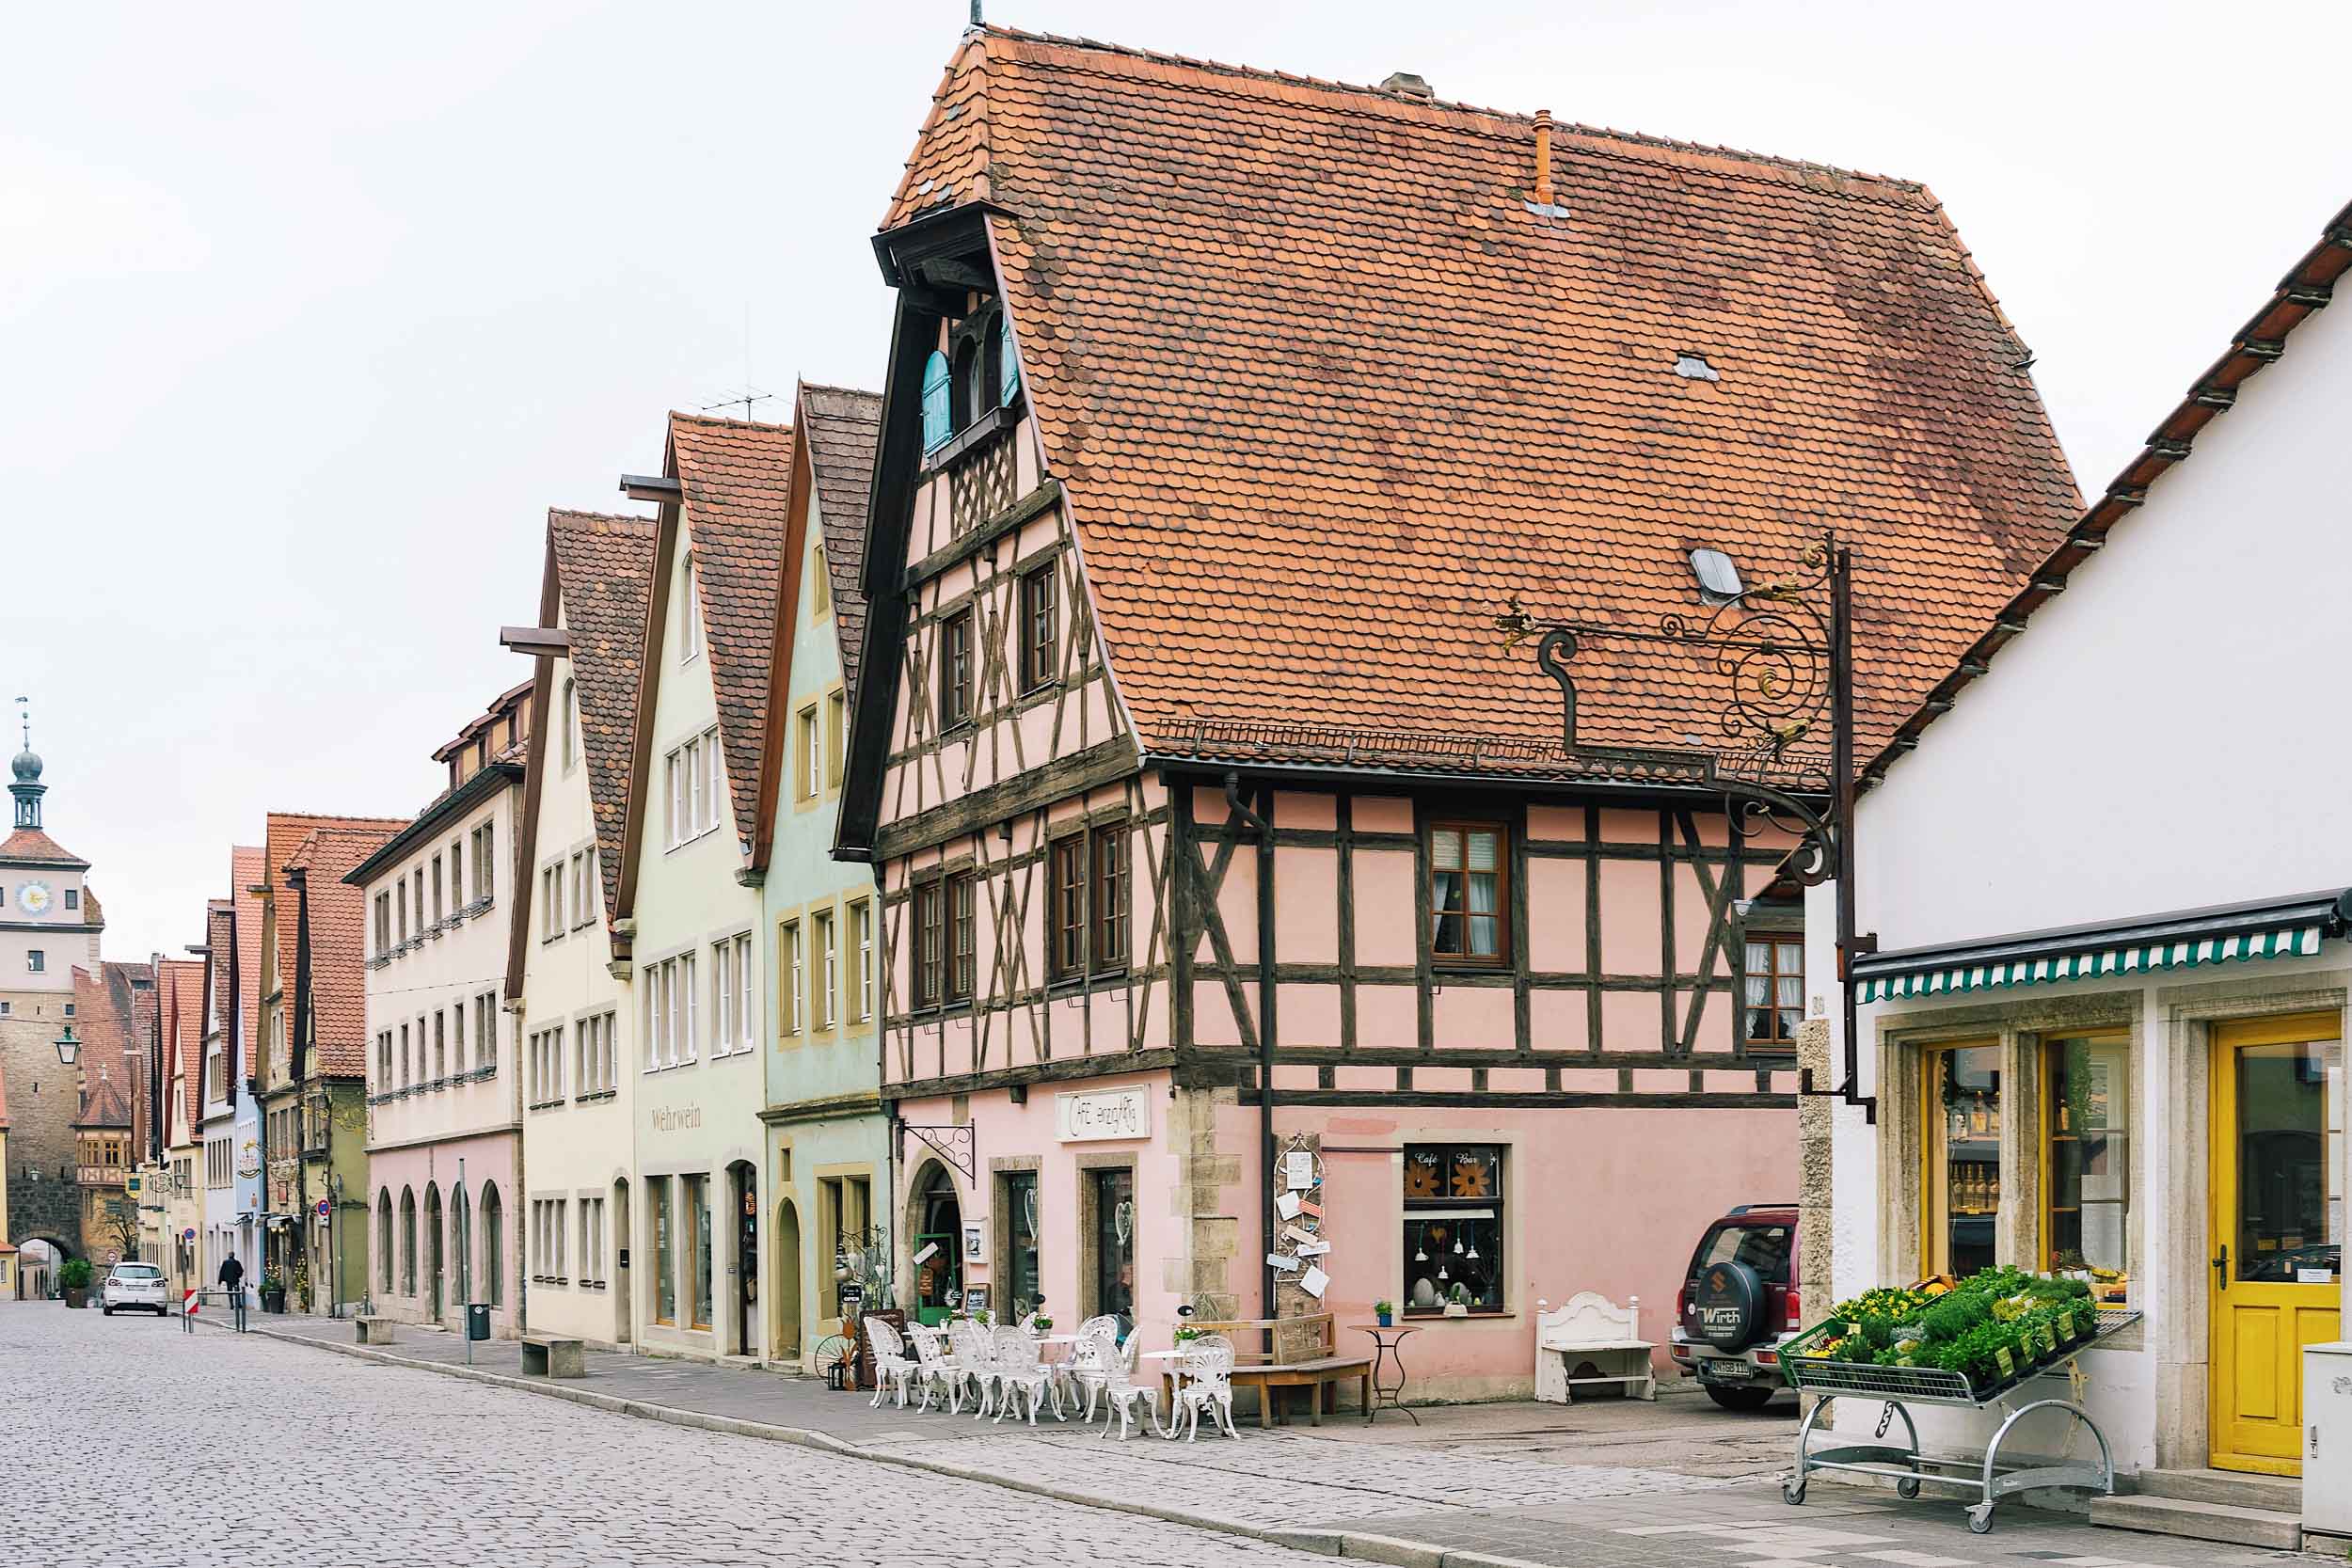 The perfect day trip from Frankfurt: the medieval fairytale town of Rothenburg